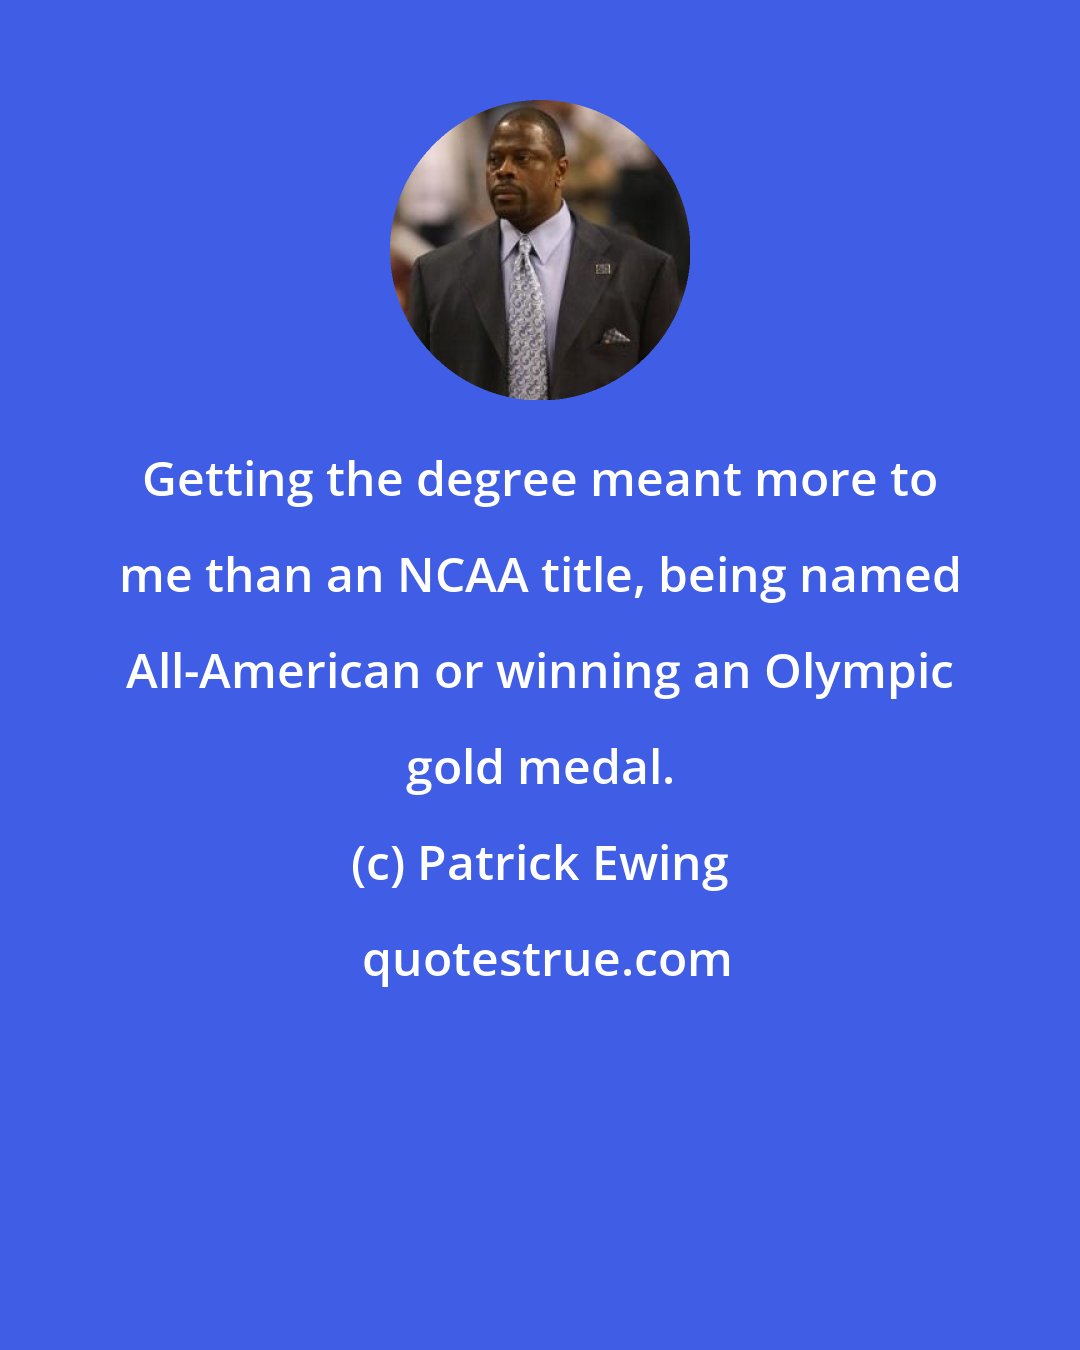 Patrick Ewing: Getting the degree meant more to me than an NCAA title, being named All-American or winning an Olympic gold medal.